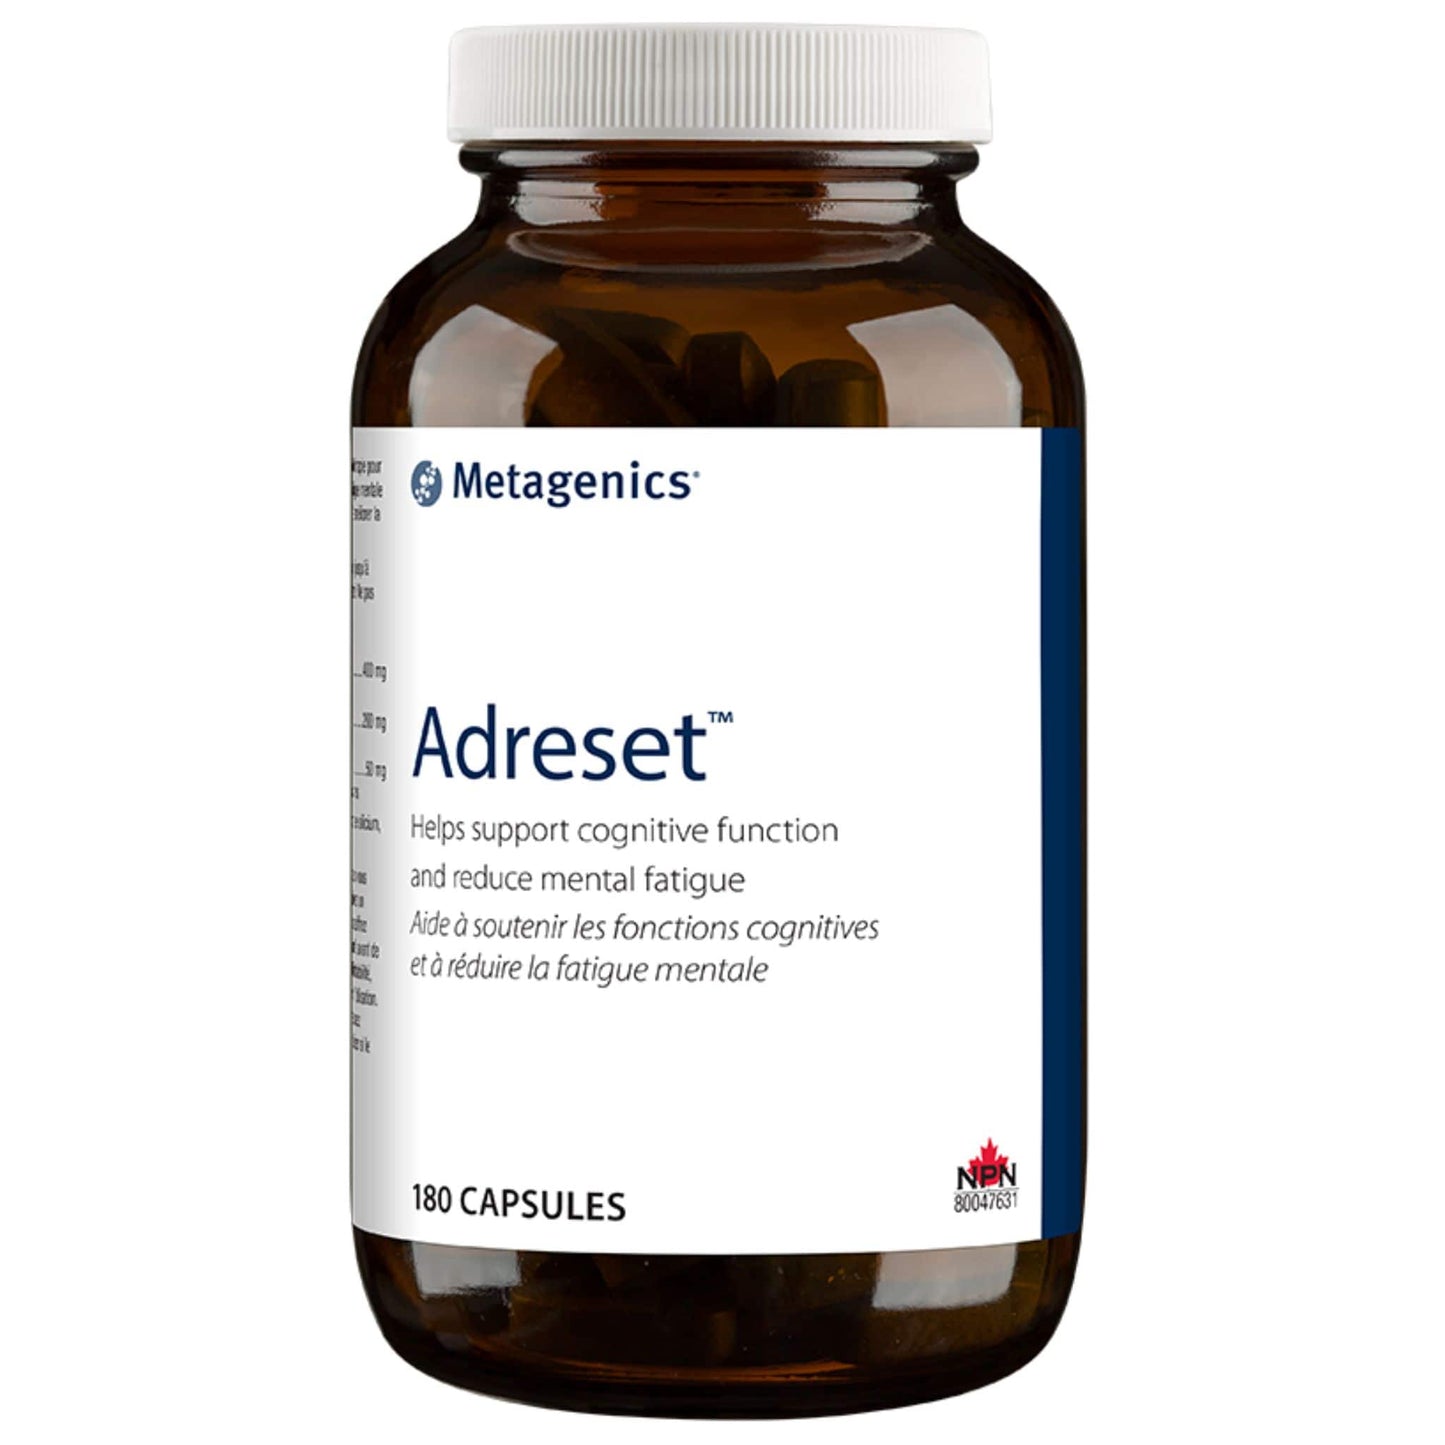 Metagenics Adreset, Supports Cognitive Function and Reduces Mental Fatigue, Capsules